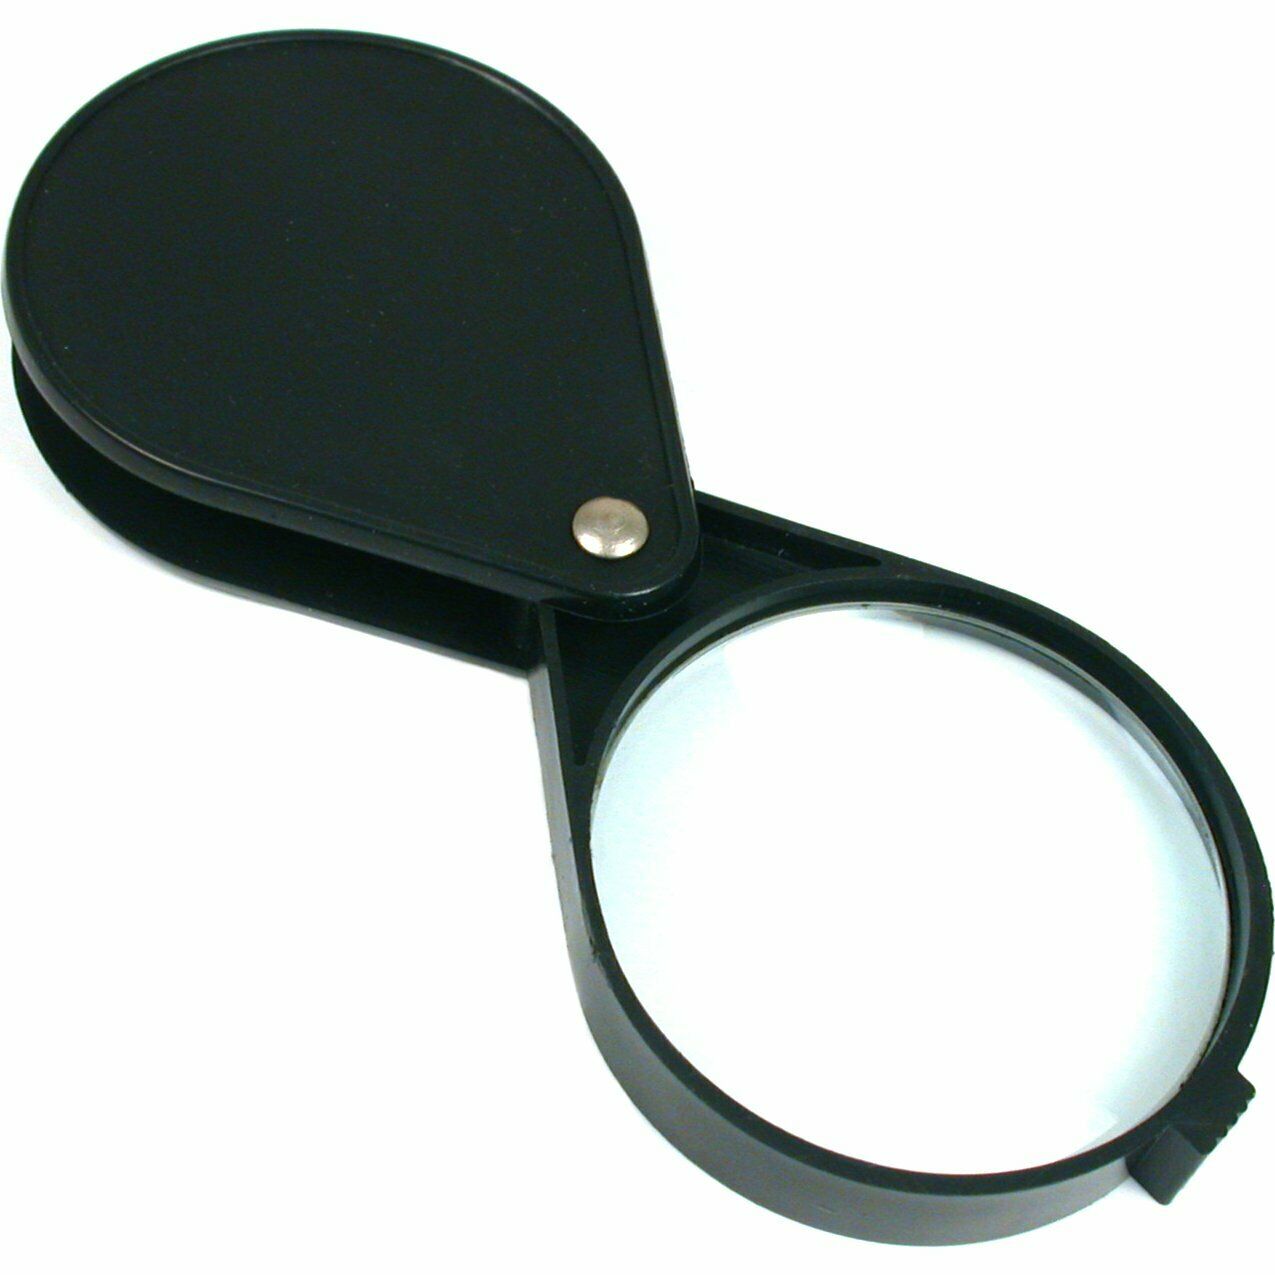 4x Folding Magnifier Magnifying Glass Magnification Pocket Travel Jewelers Tool